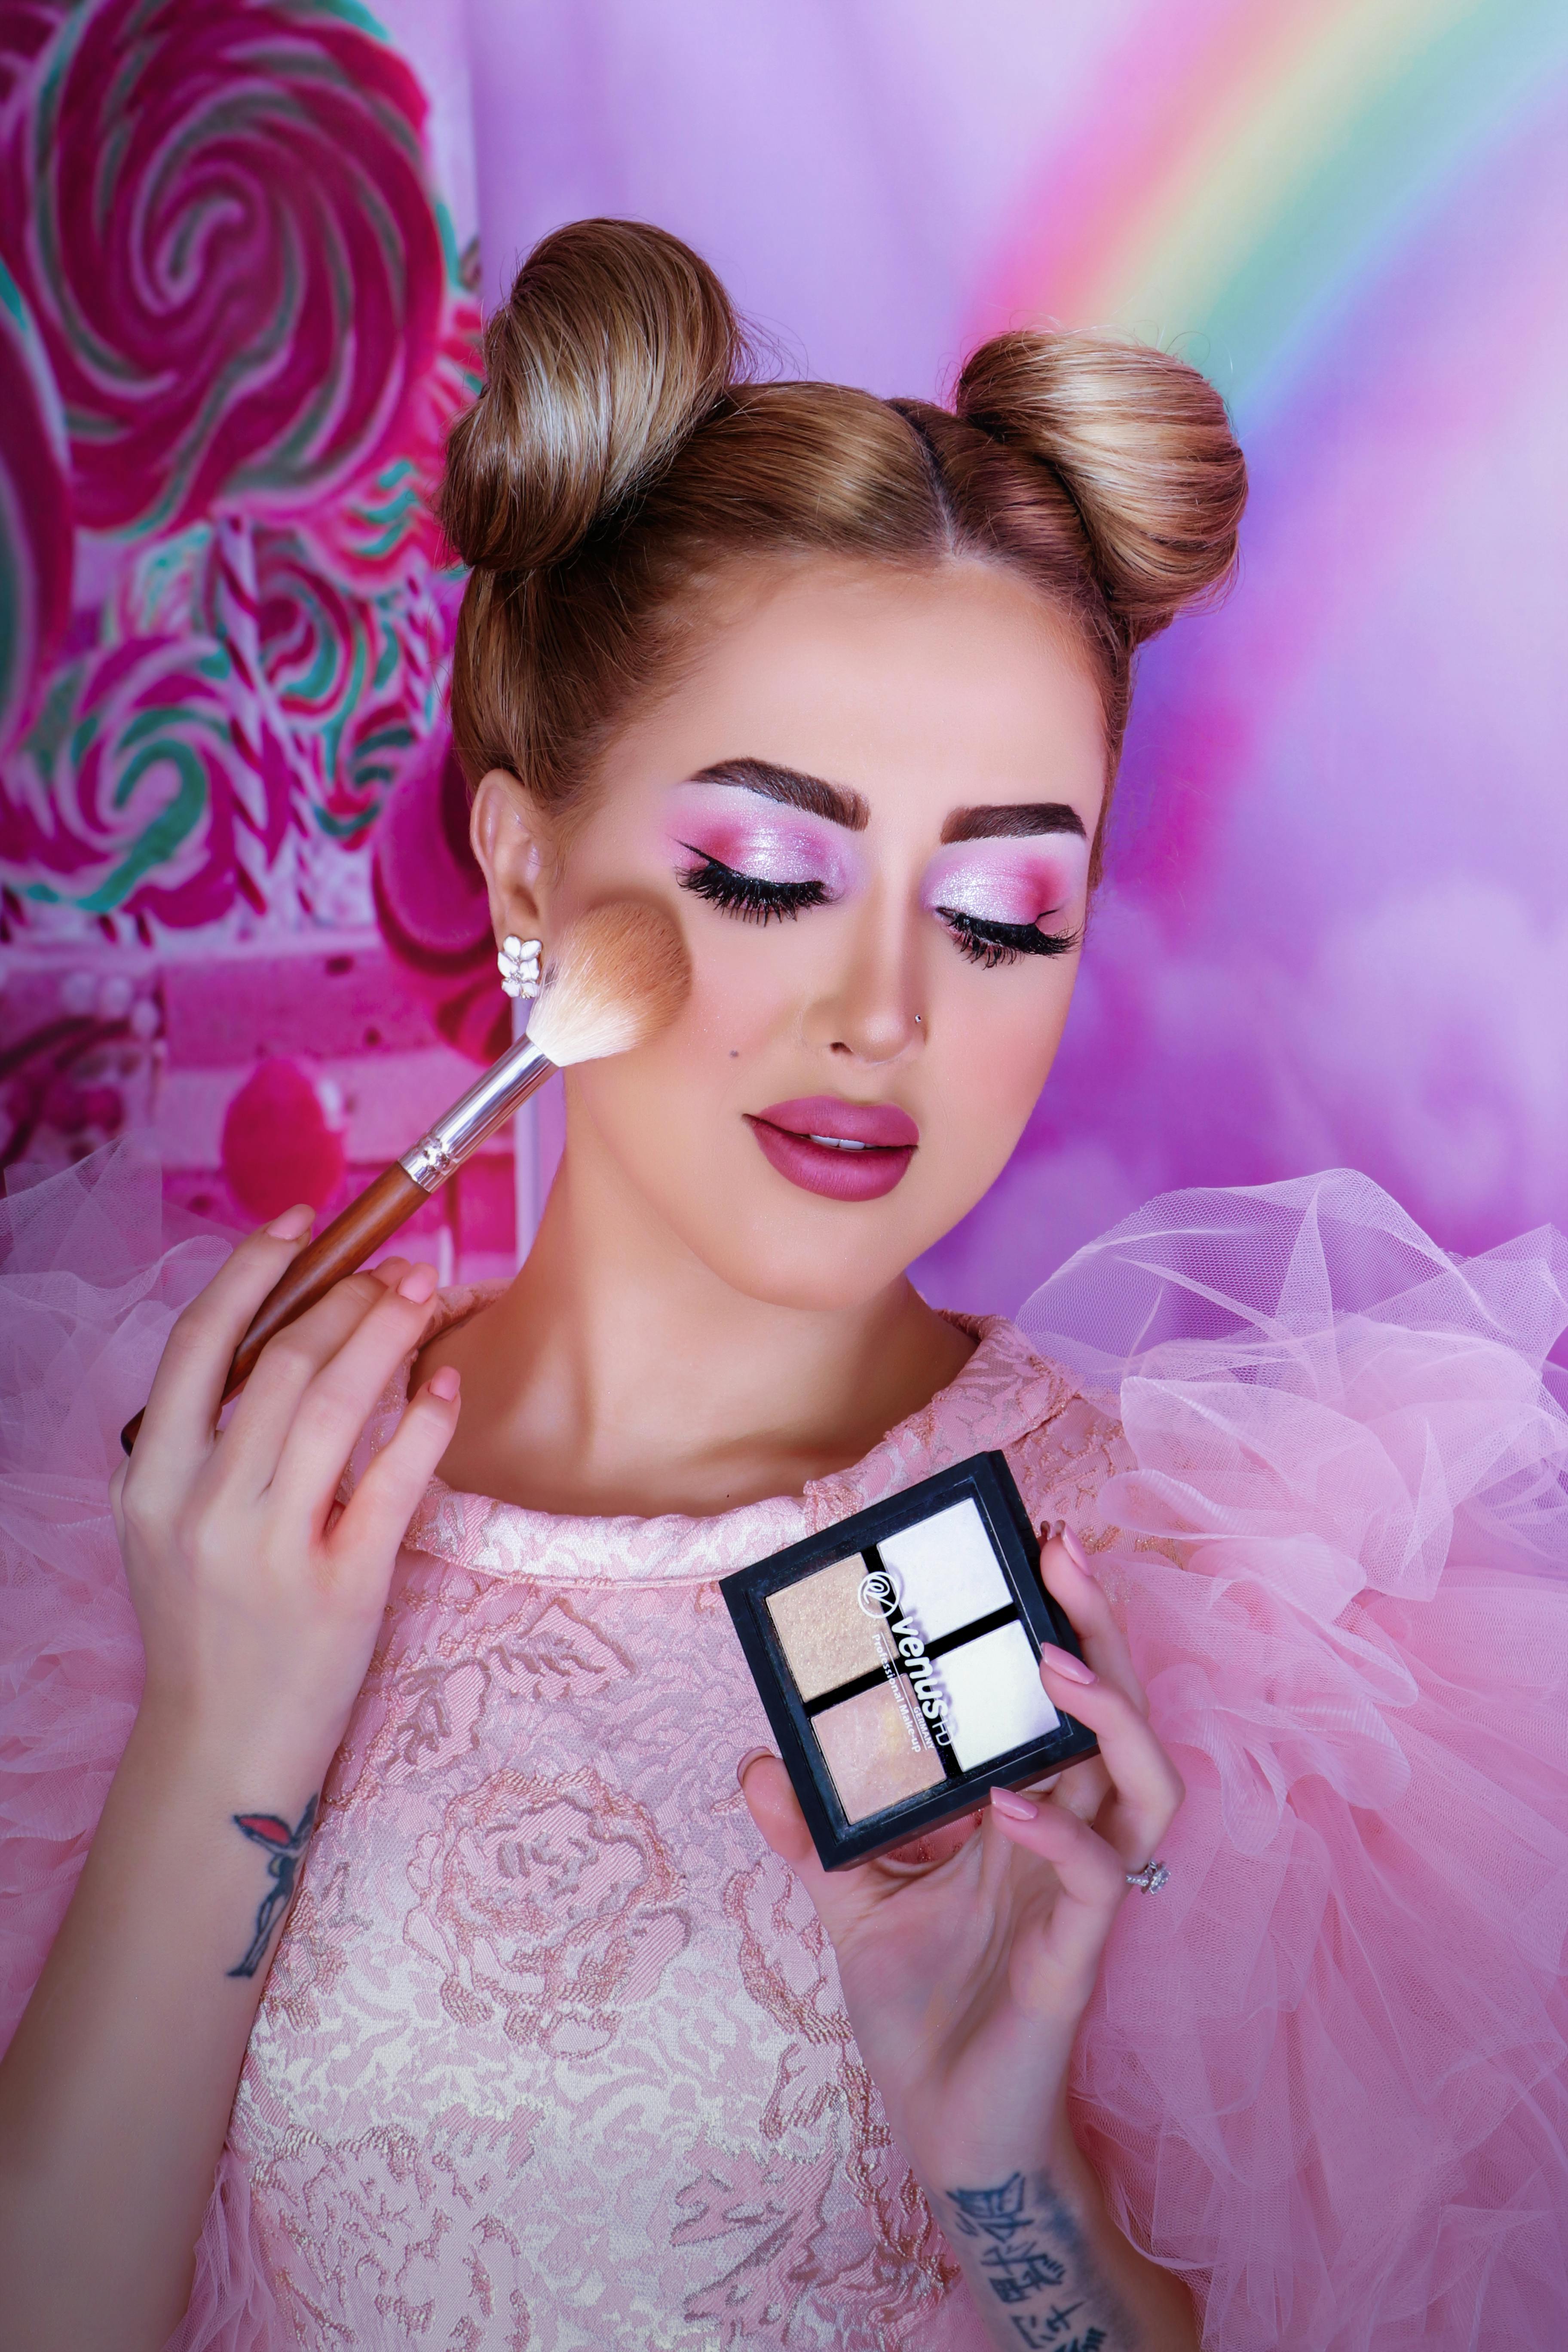 Make Up Photos, Download The BEST Free Make Up Stock Photos & HD Images